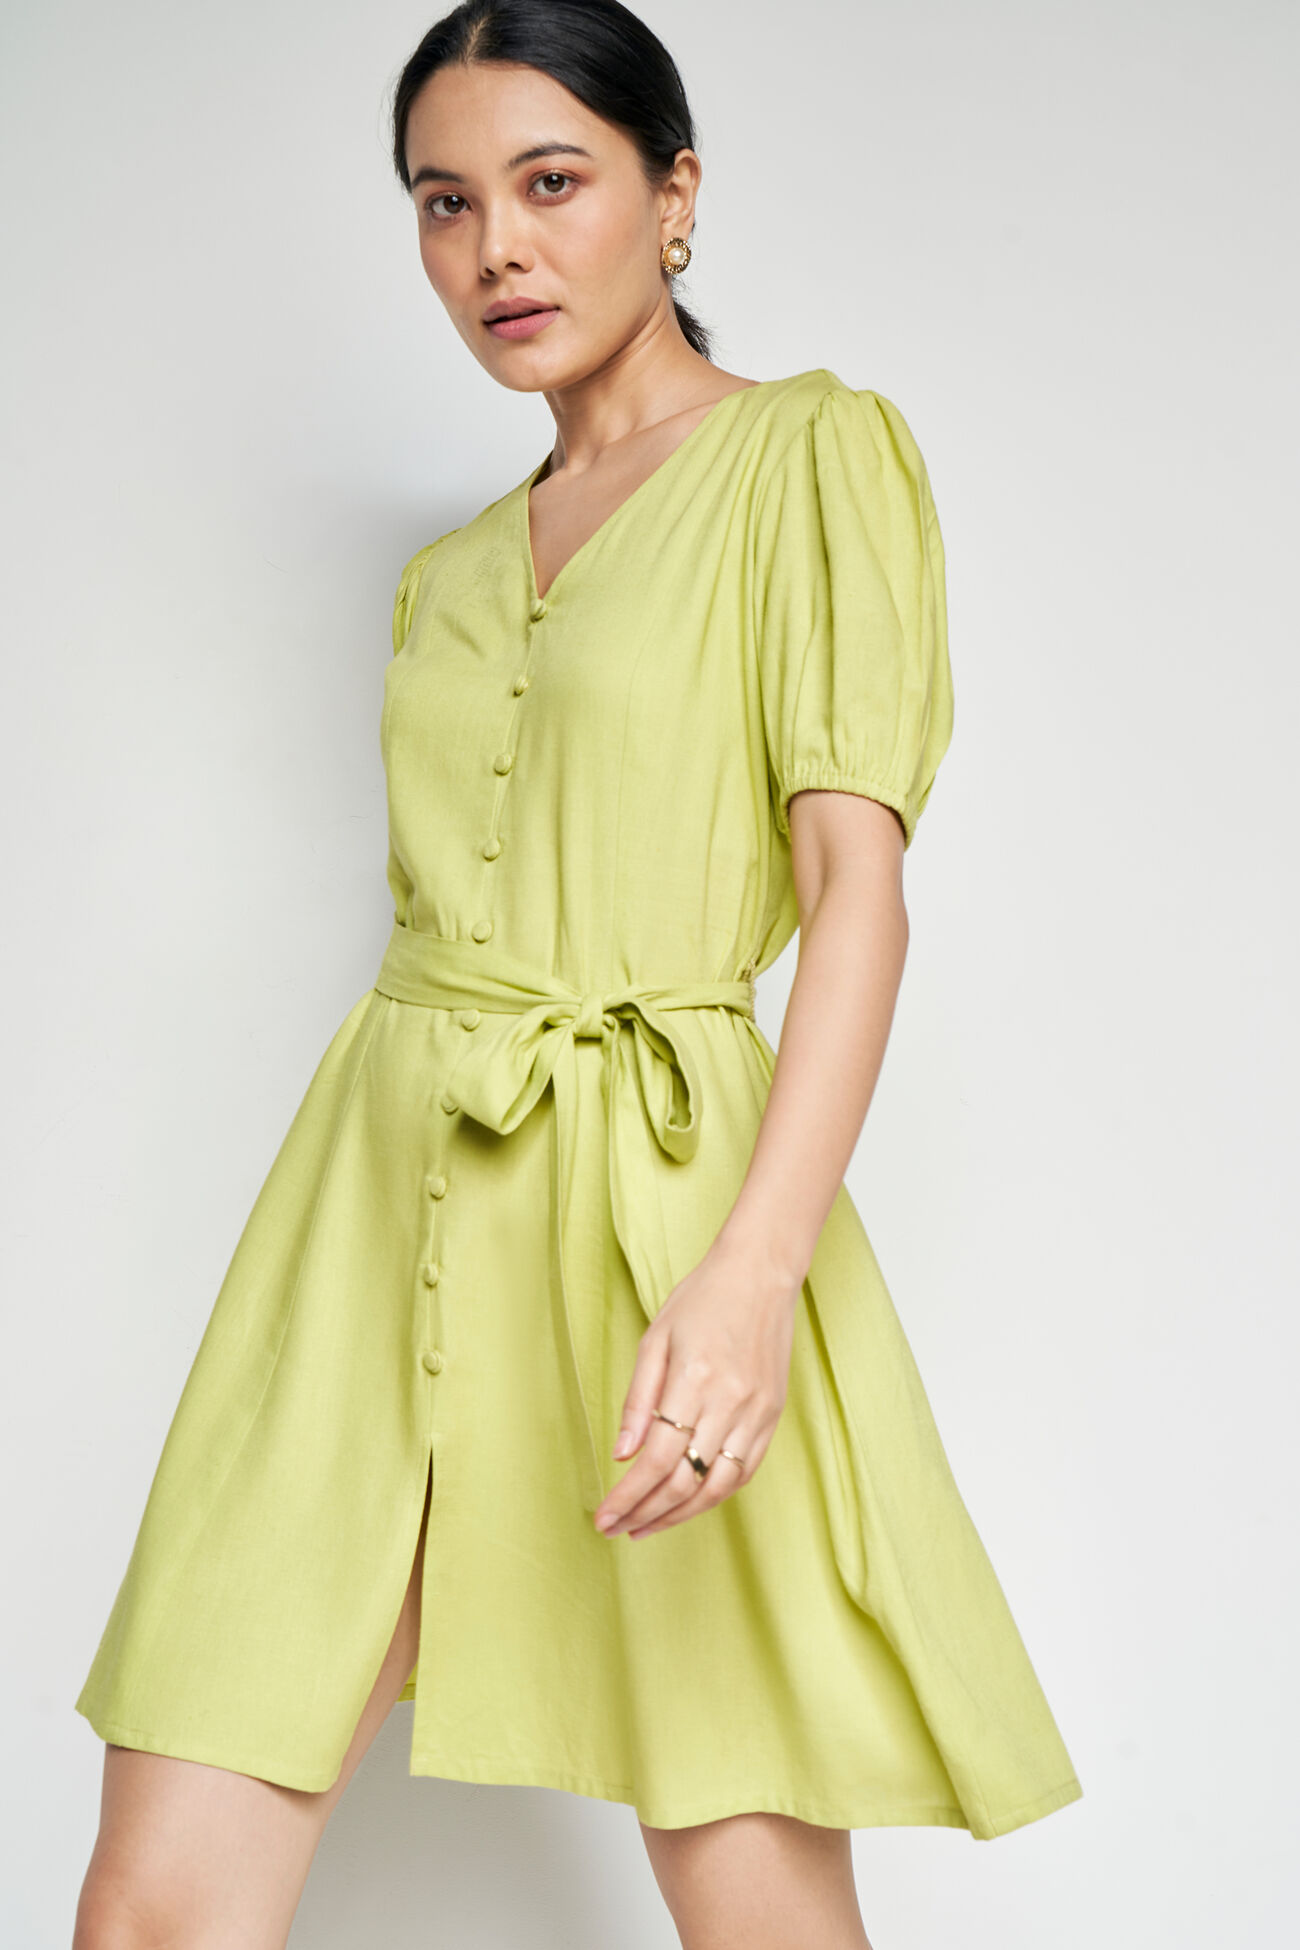 Star In Your Eyes Dress, Lime Green, image 1